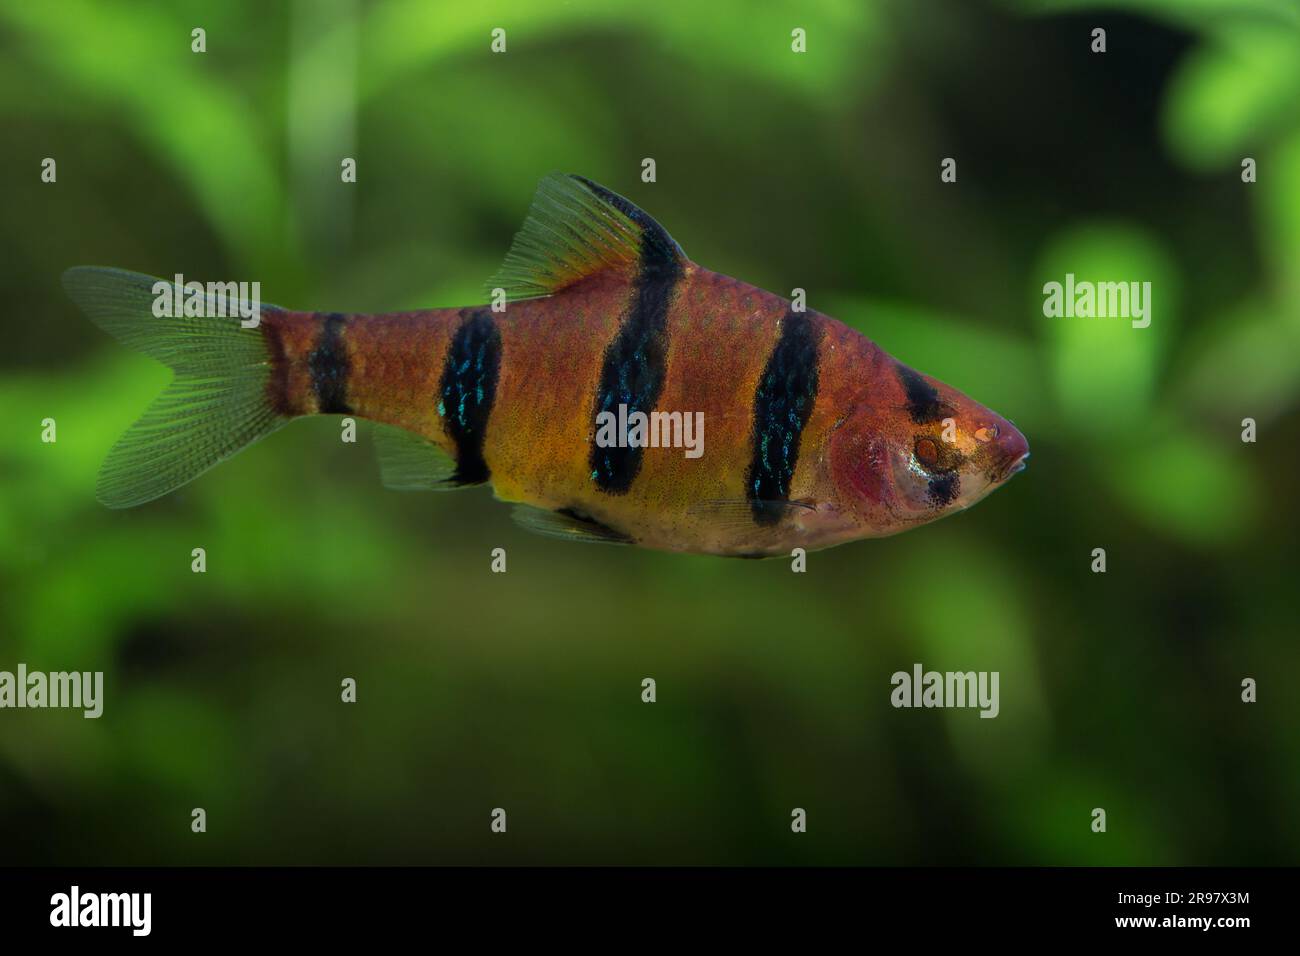 Five Banded Barb [ Desmopuntius pentazona ] fish showing loss of an eye in planted home aquarium Stock Photo